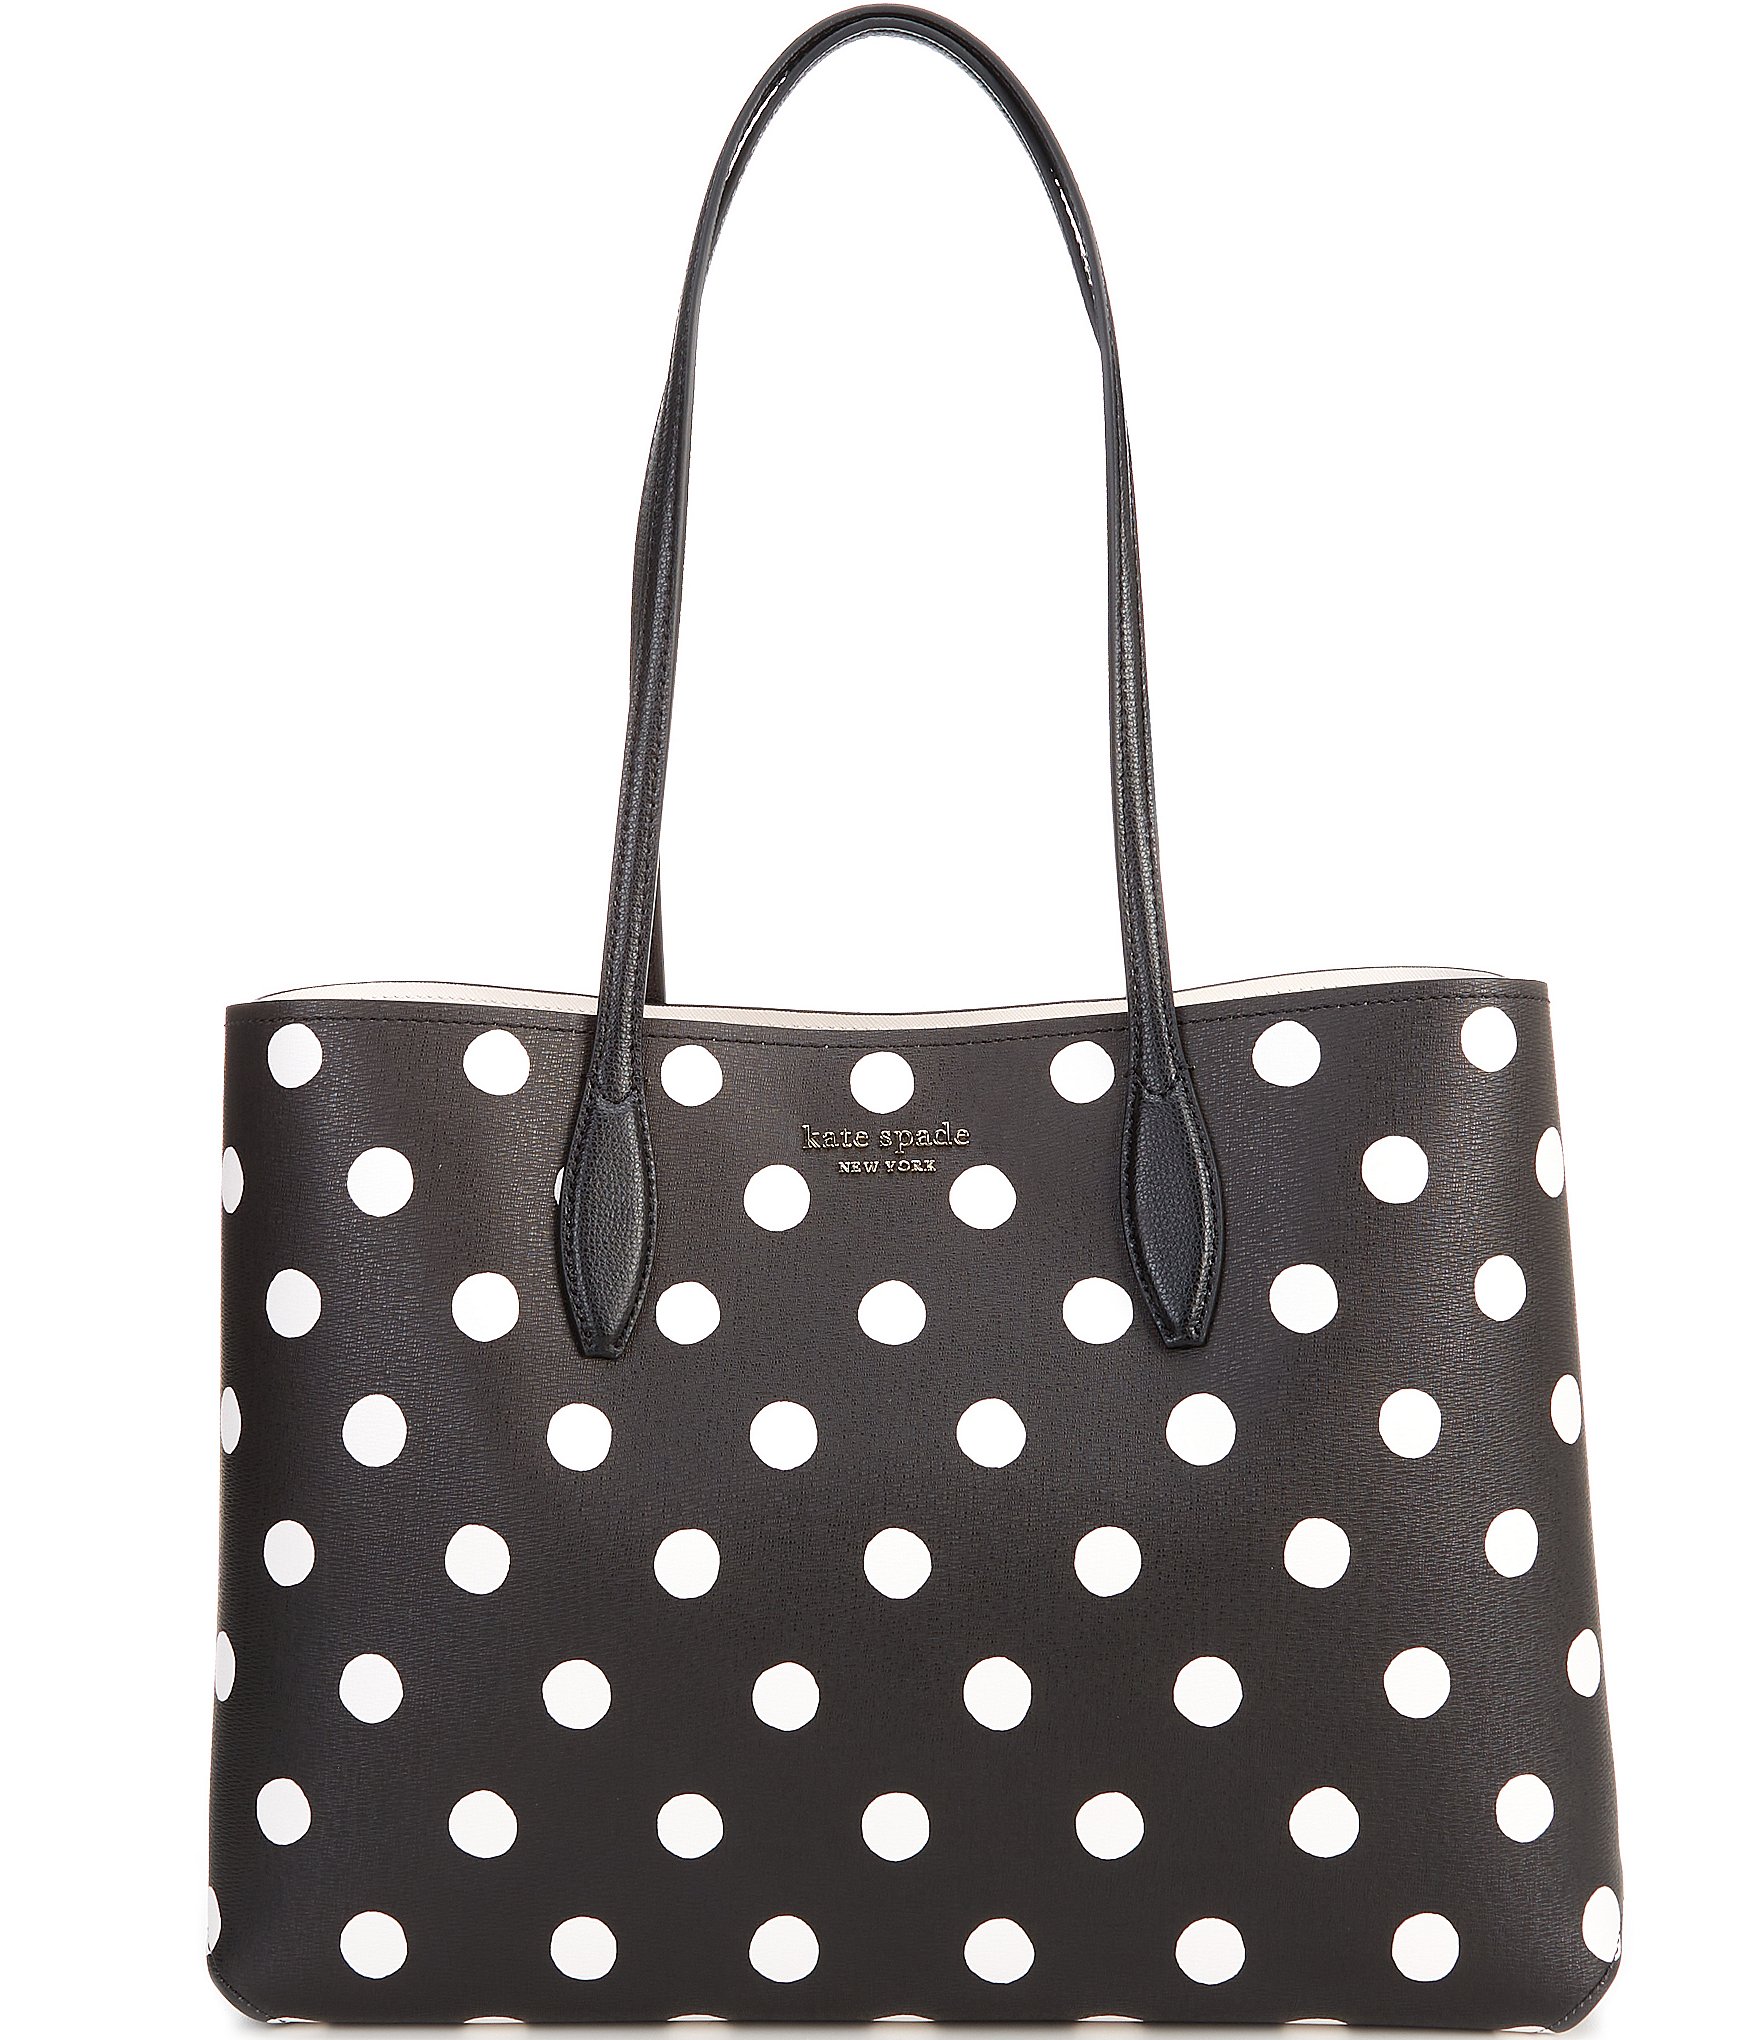  Kate Spade New York Cute Canvas Tote Bag for Women, Black  Canvas Beach Bag, Book Tote with Pocket, Scatter Dot : kate spade new york:  Clothing, Shoes & Jewelry